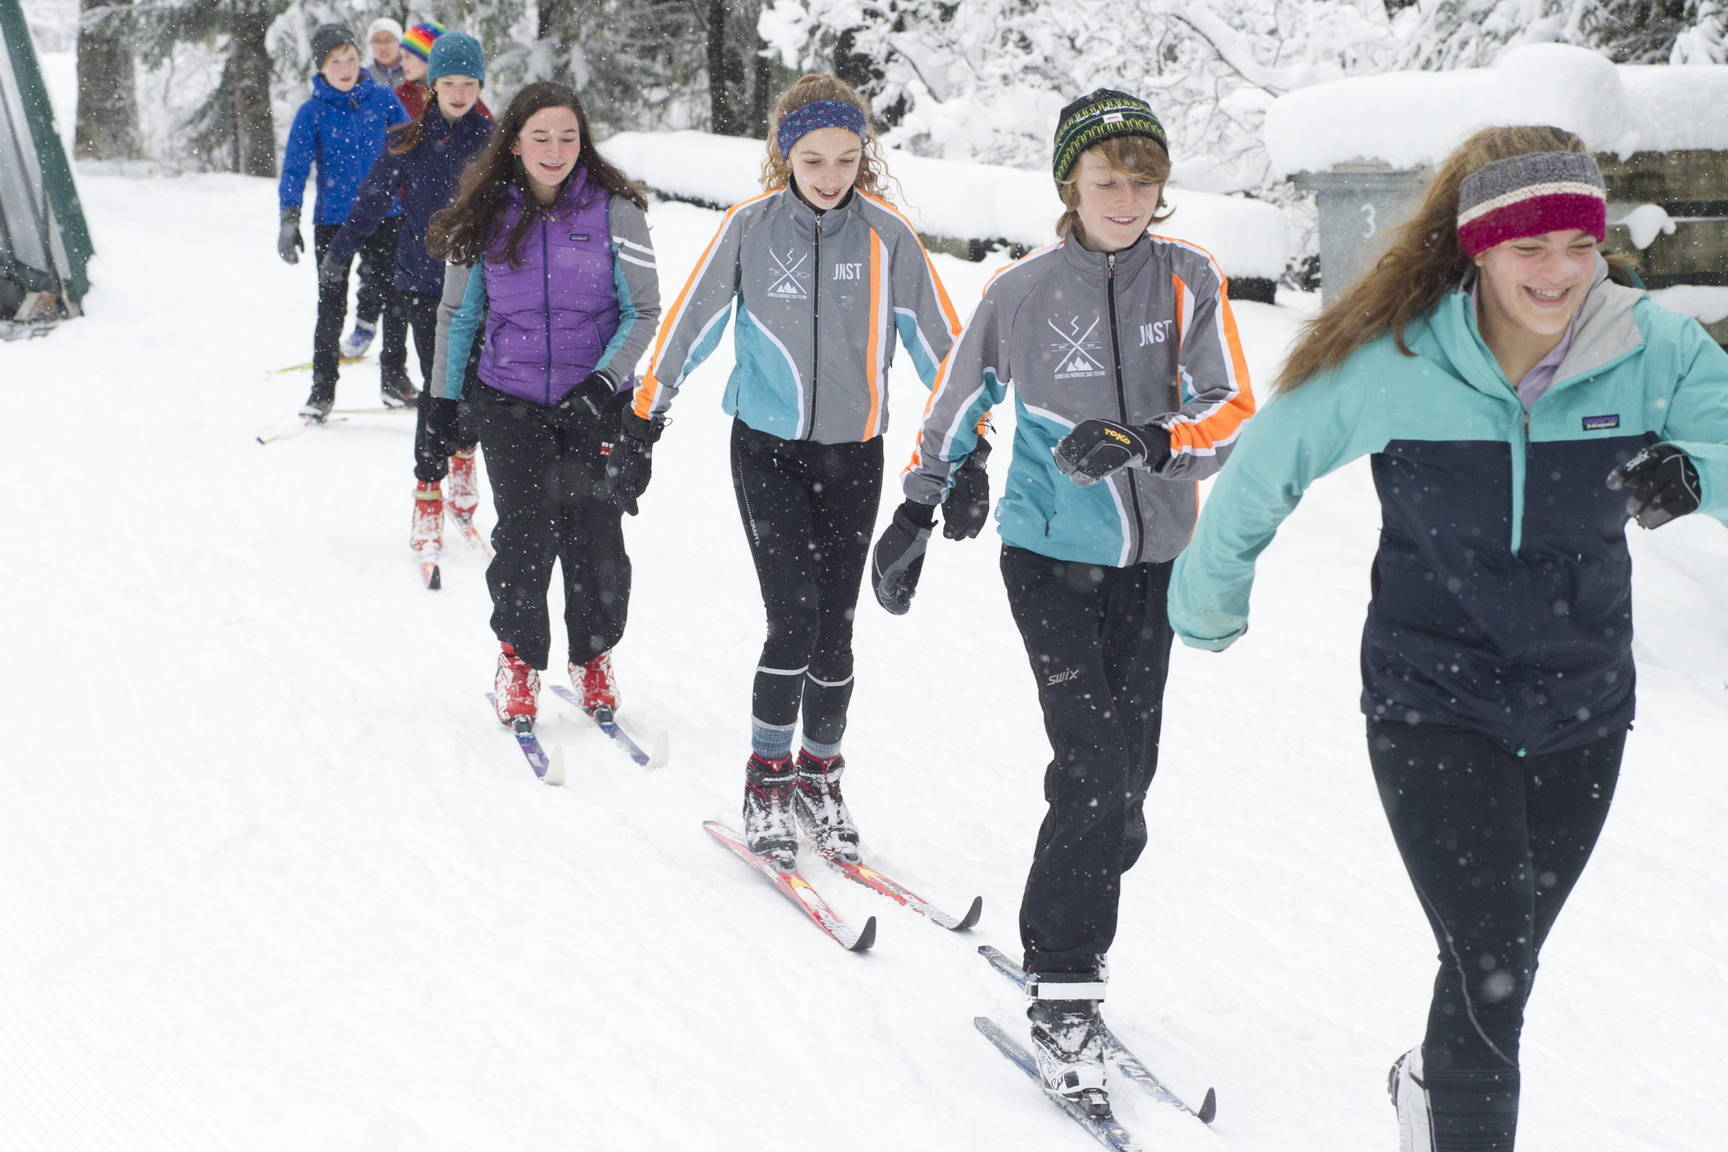 Juneau Nordic Ski Team members Erin Wallace, front, leads Aaron Blust and Anna Iverson in a pole-less skiing drill through fresh snow on Saturday, Nov. 18, 2017, at the Mendenhall Campgrounds. The team has been granted interim high school “club” status to compete in the Alaska School Activities Association’s state championship for the first time in many years in February. (Nolin Ainsworth / Juneau Empire file photo)